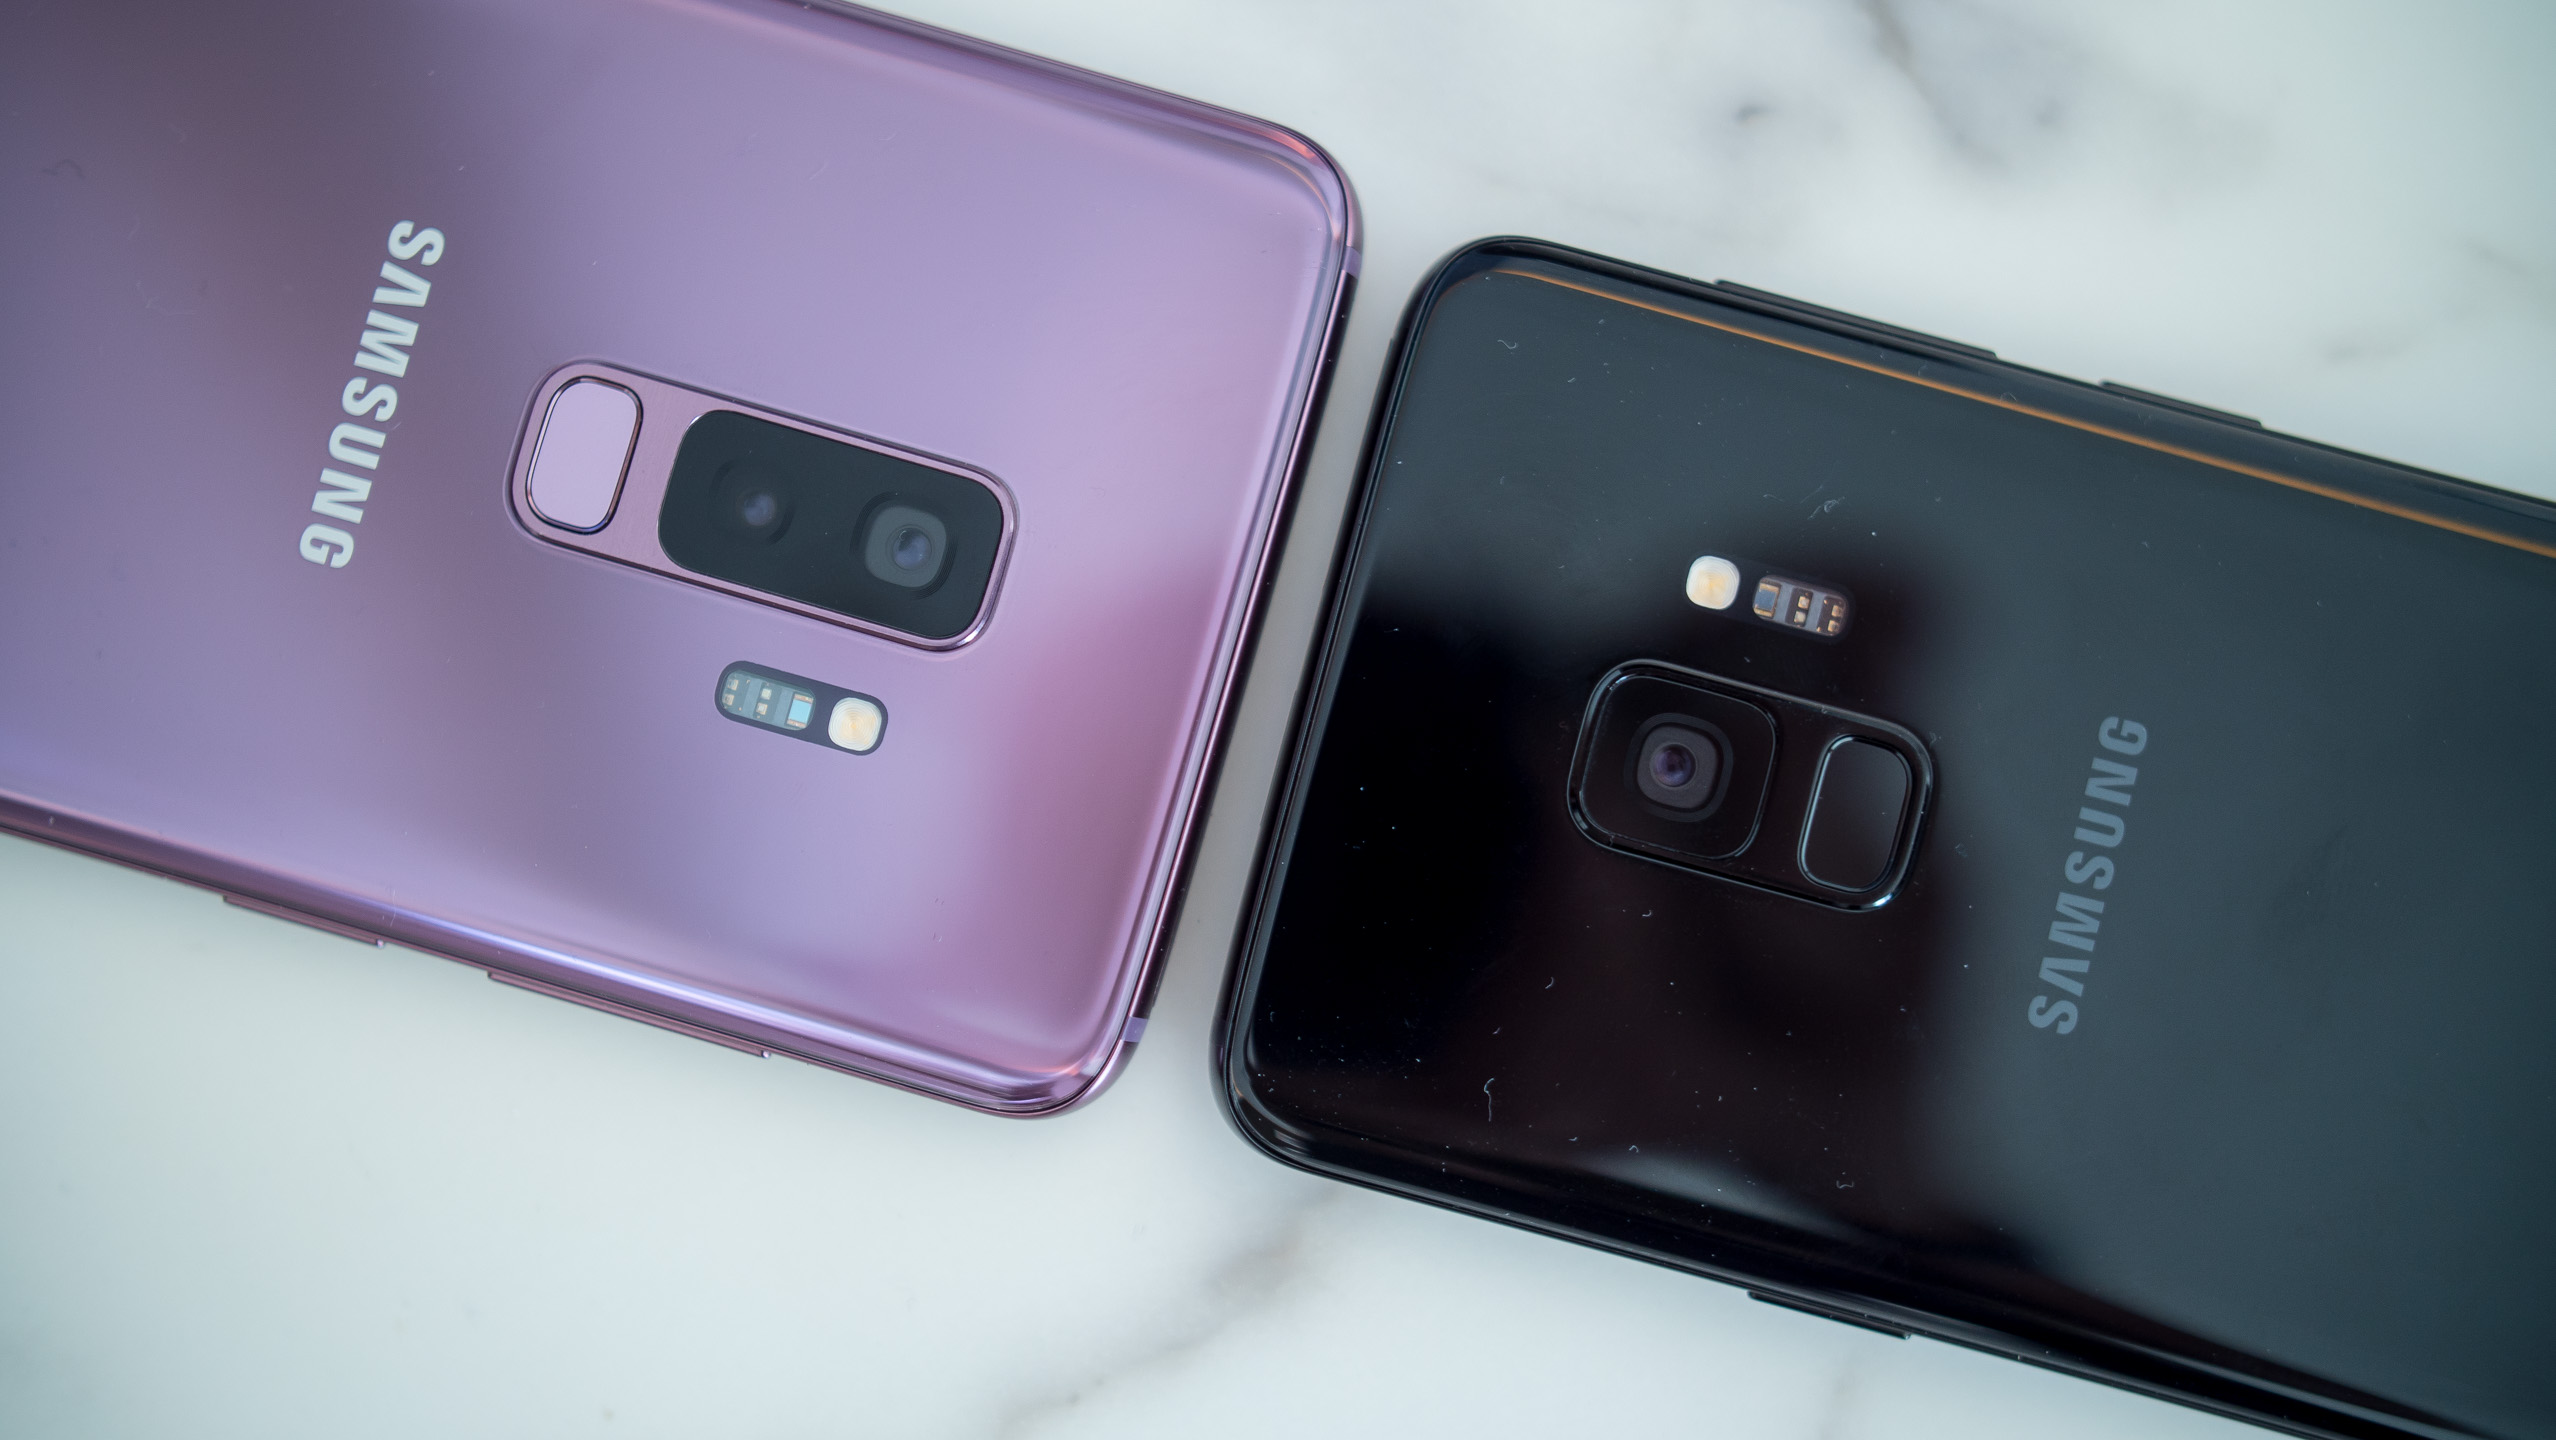 Backside of the Samsung Galaxy S9 Plus next to a Galaxy S9